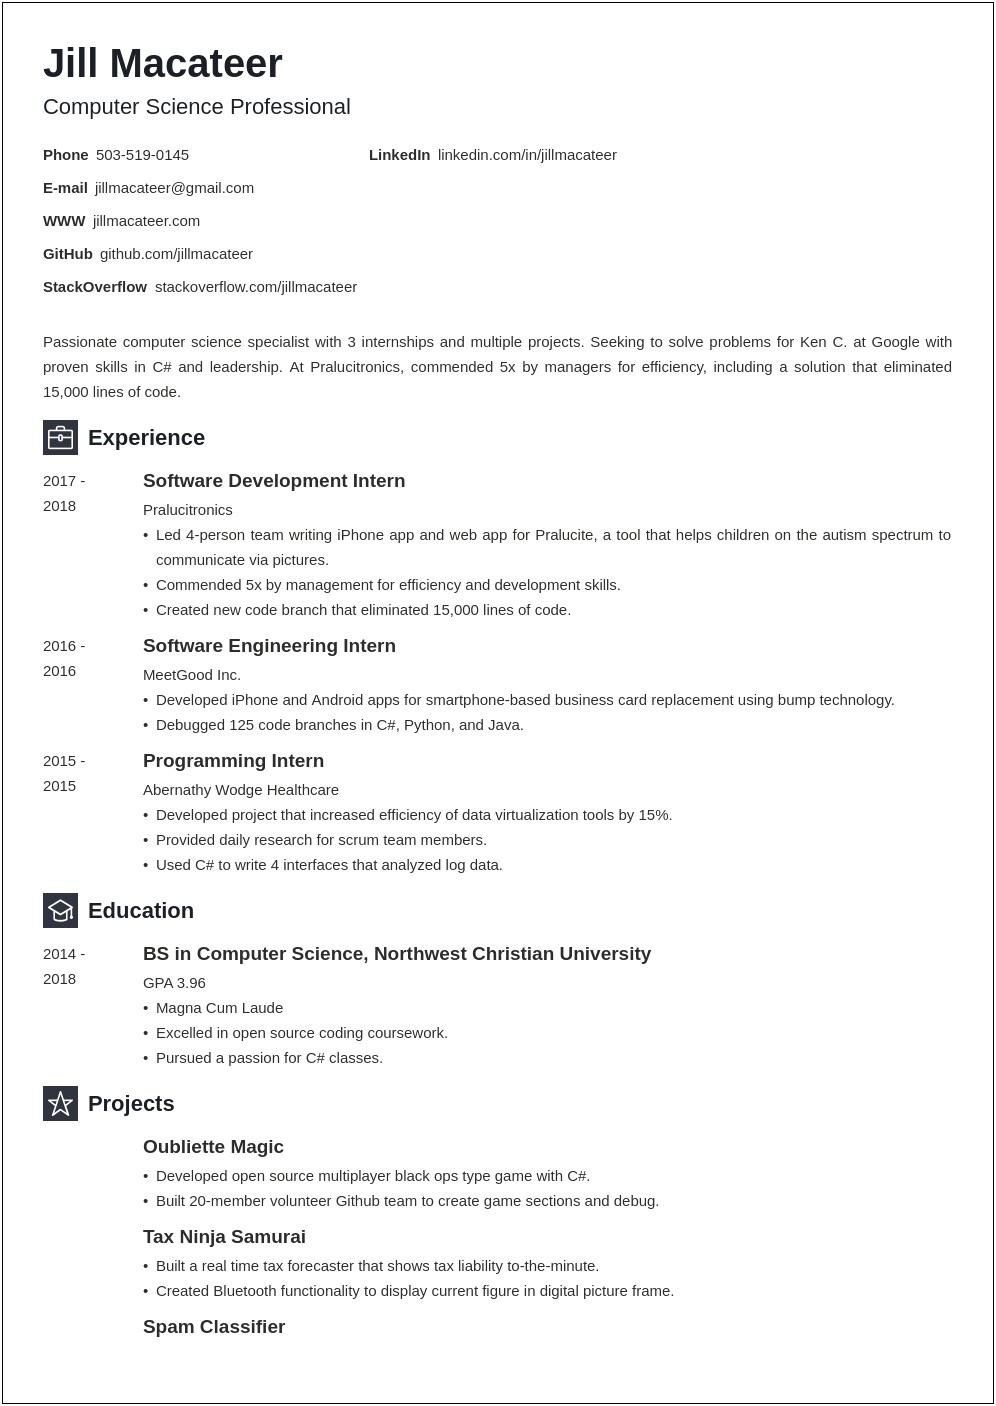 Best Short Resumes For Computer Science Jobs